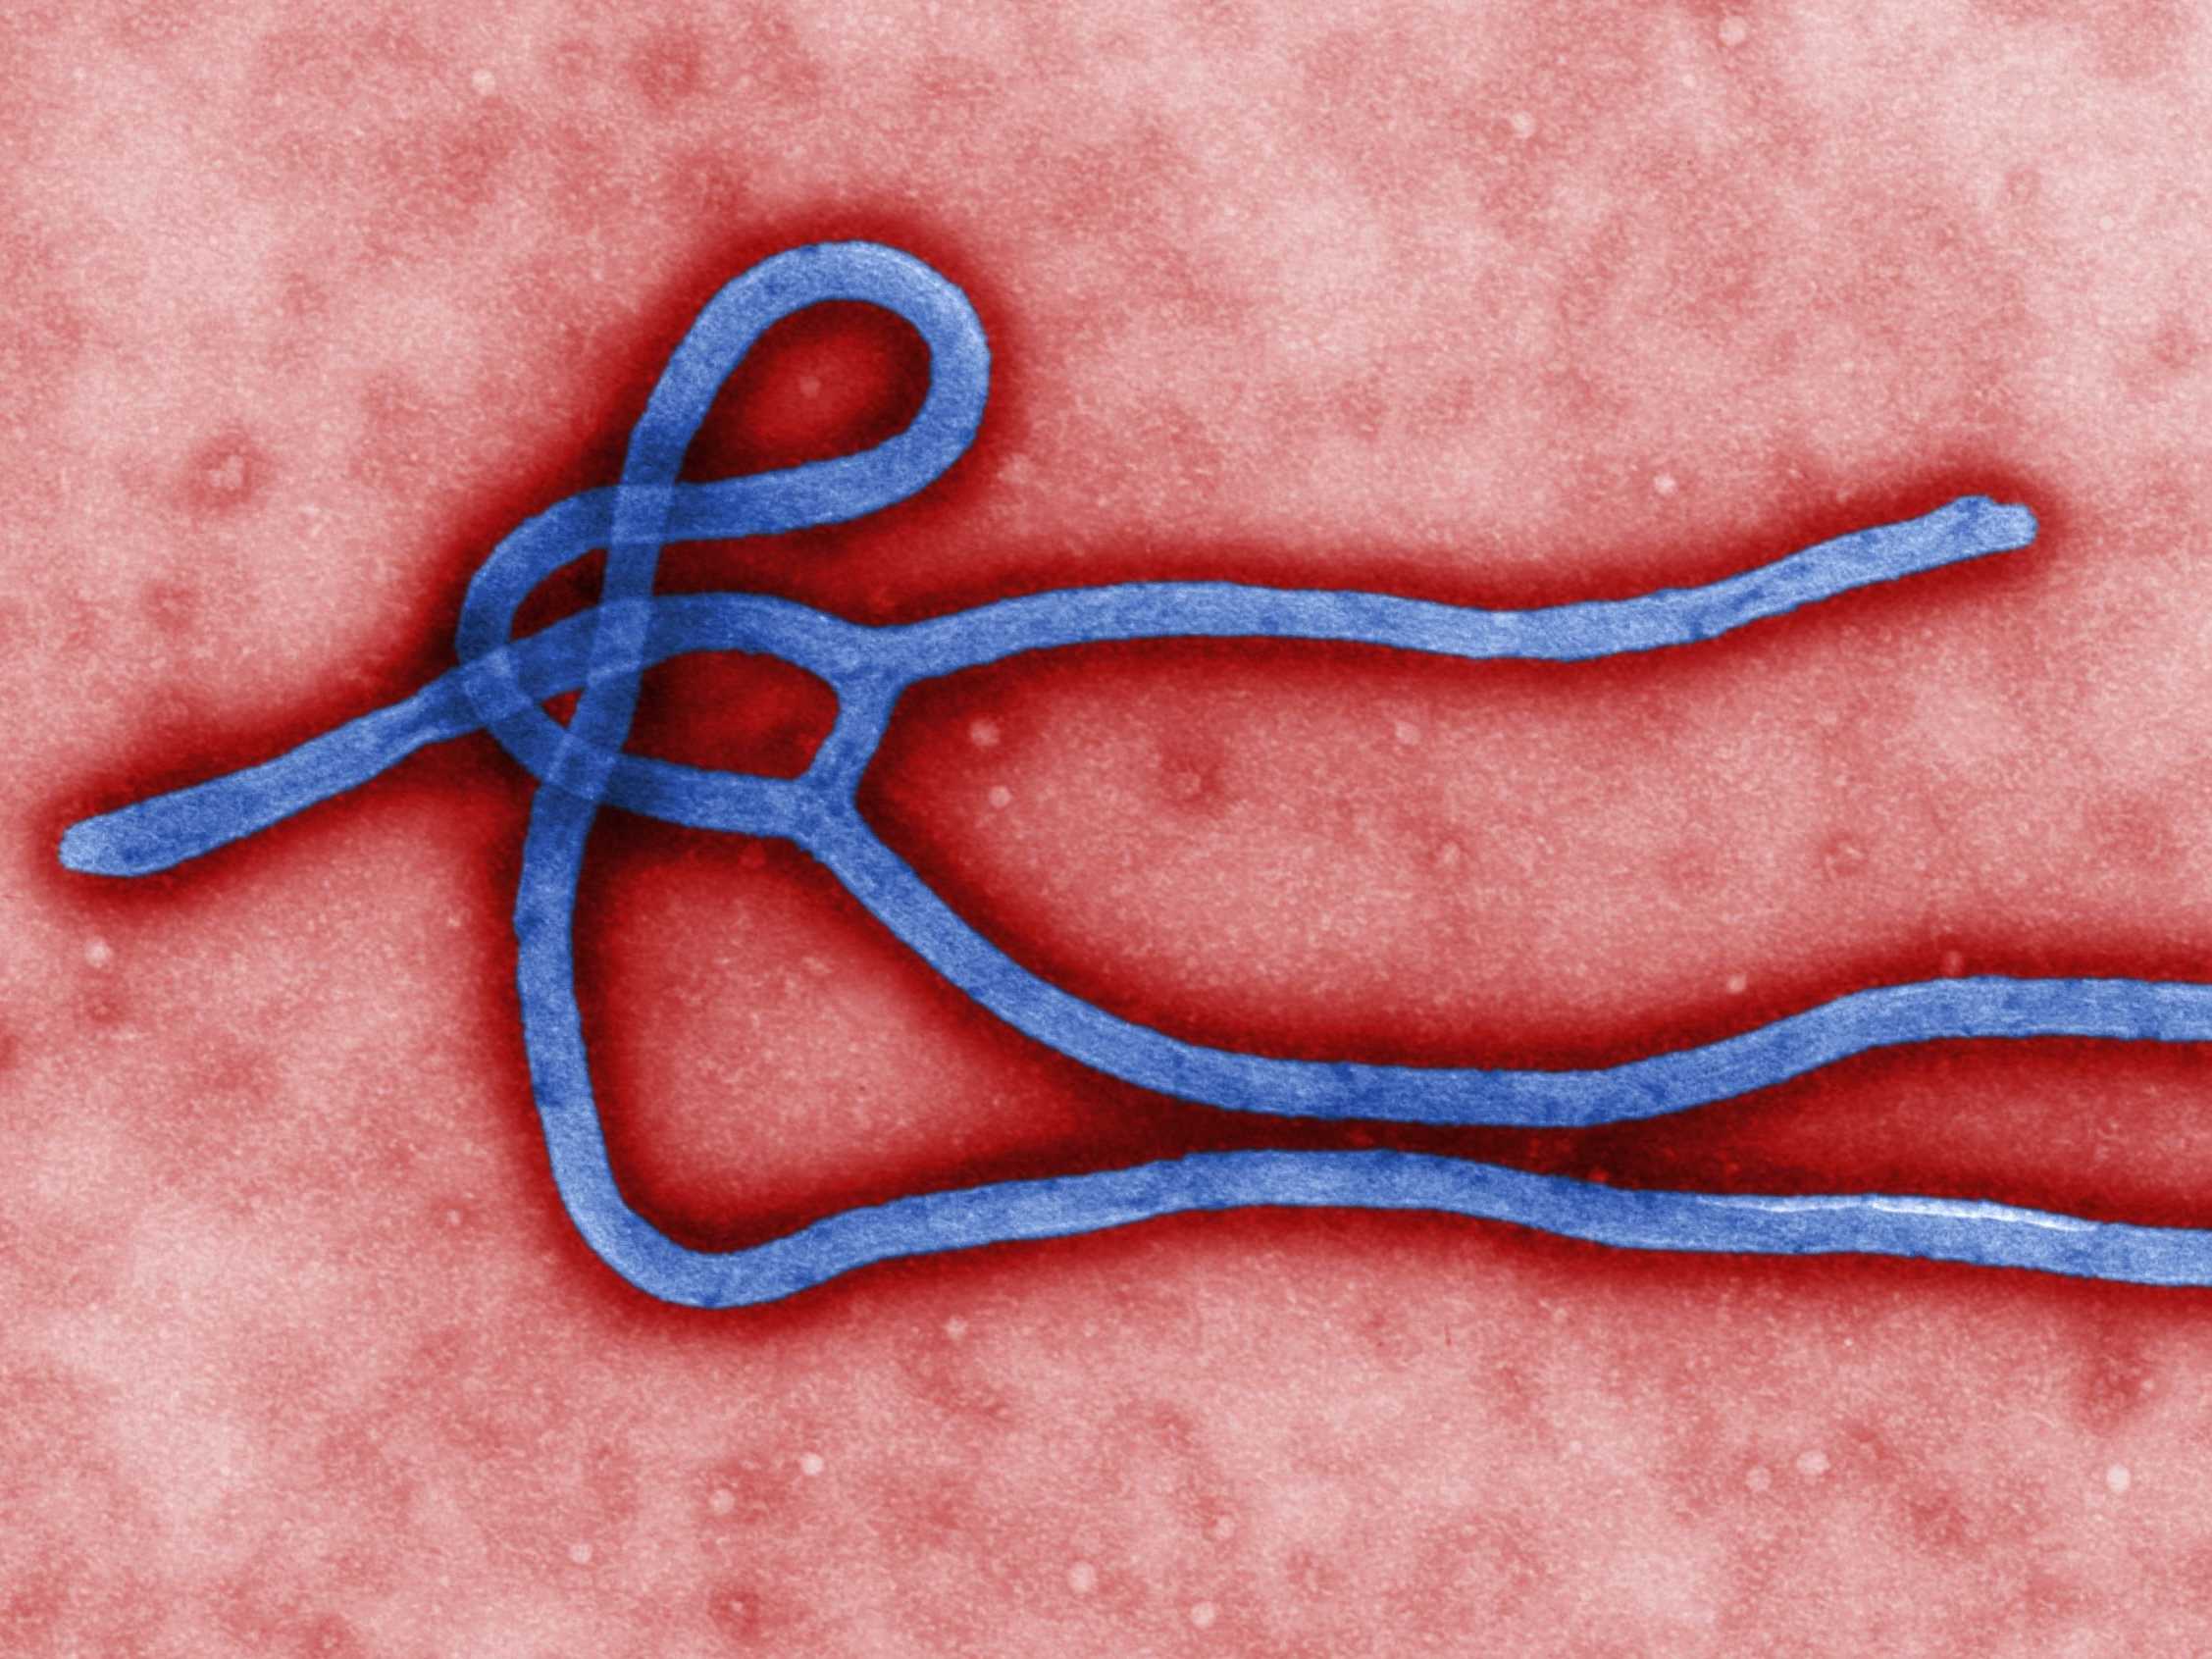 Ebola domains are spreading around the world. 